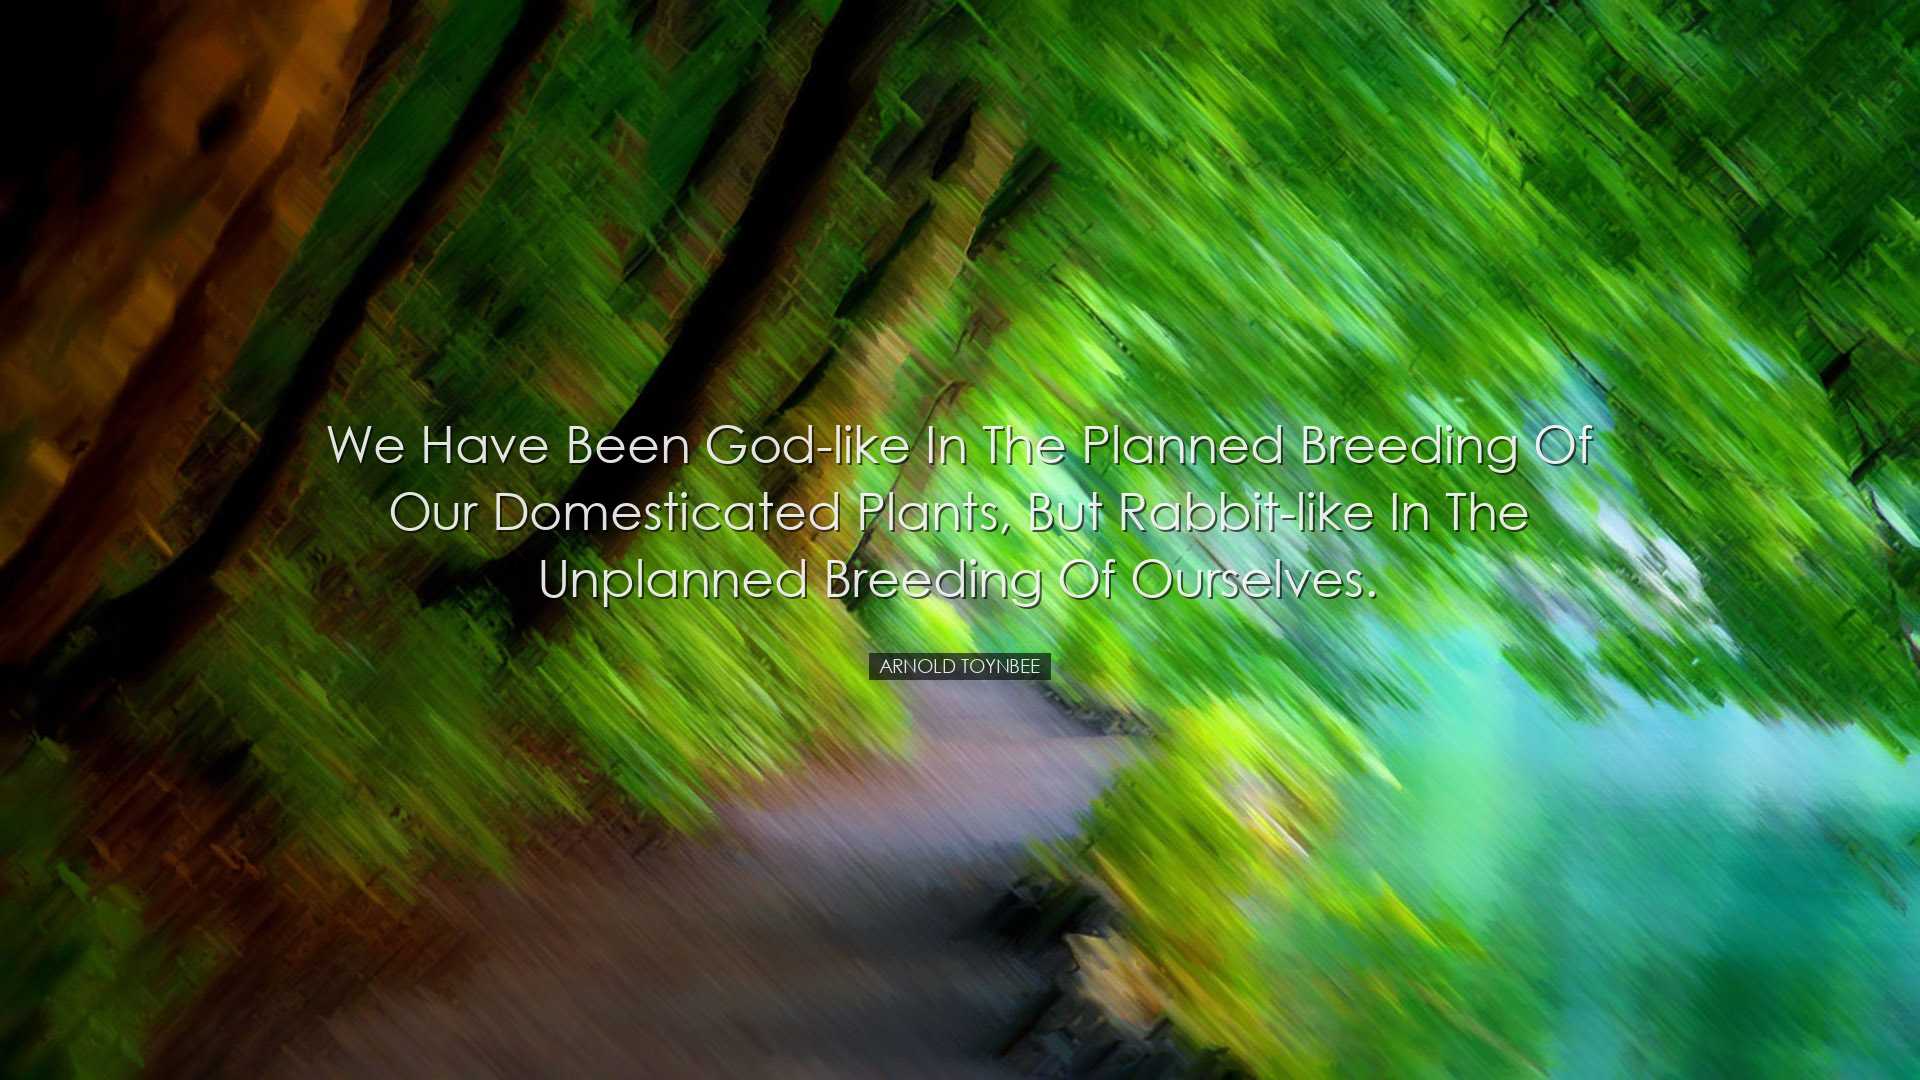 We have been god-like in the planned breeding of our domesticated